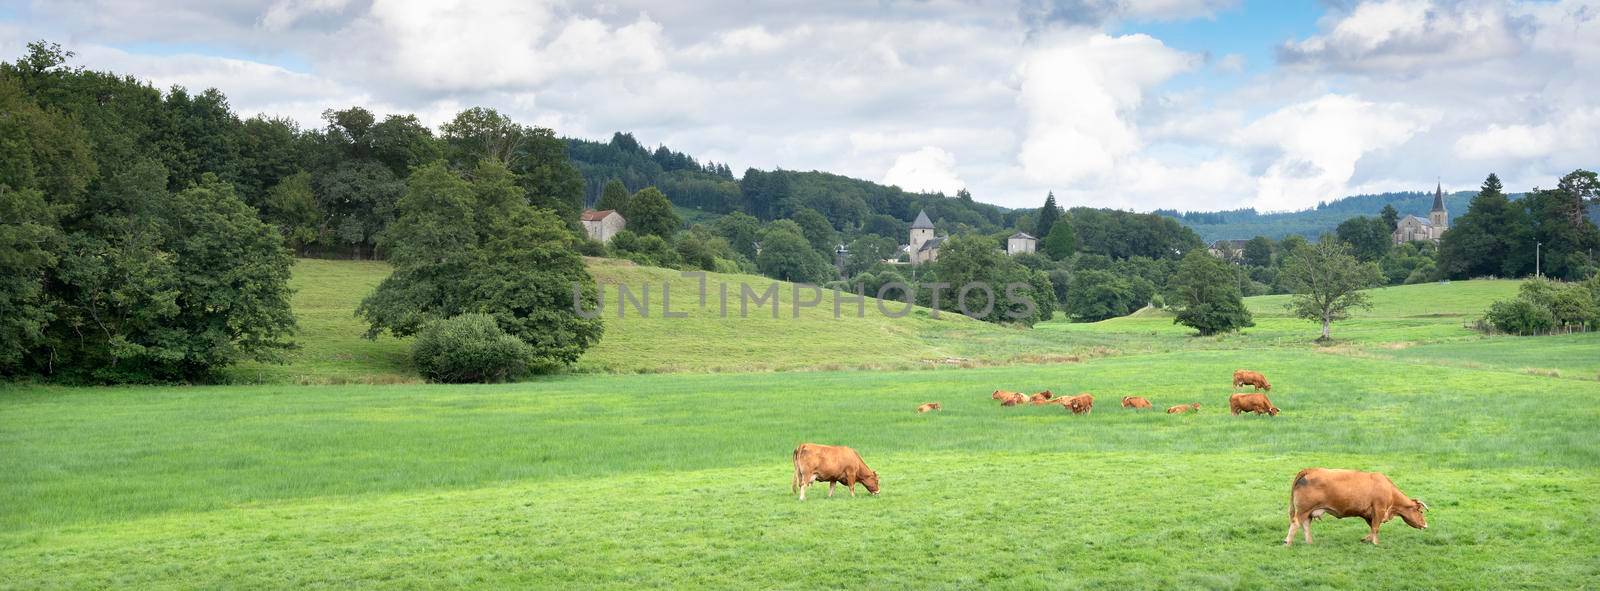 brown cows graze in green grassy meadow near village not far from french city of limoges by ahavelaar